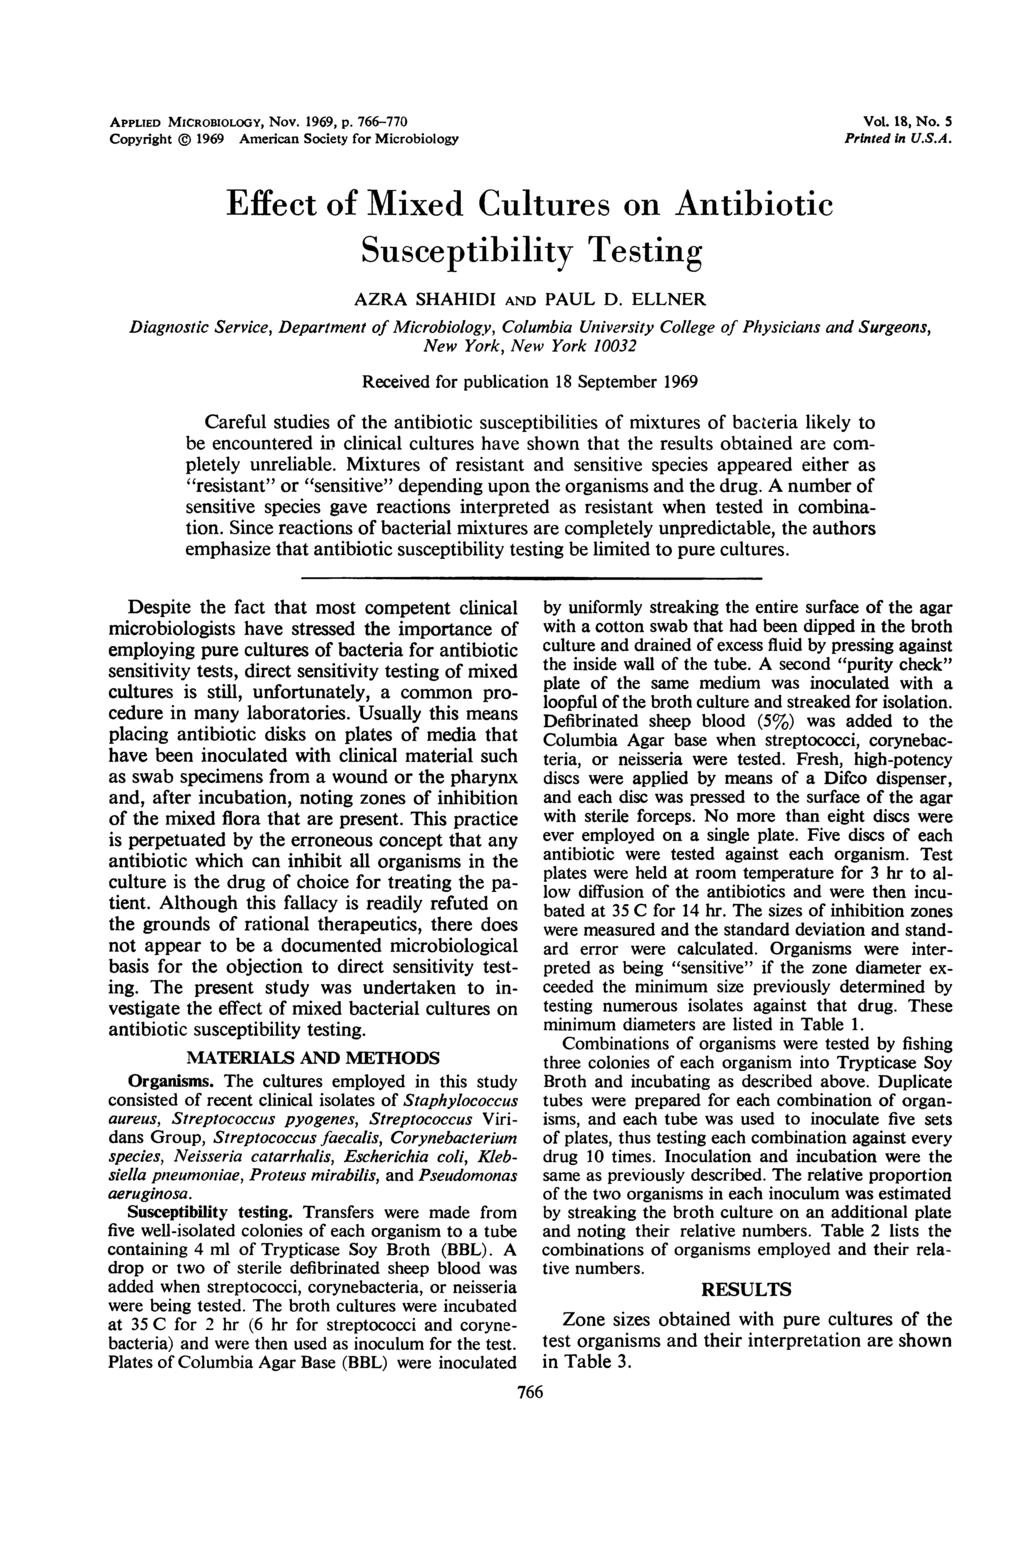 APPLIED MICROBIOLOGY, Nov. 1969, p. 766-770 Copyright 1969 American Society for Microbiology Vol. 18, No. 5 Printed in U.S.A. Effect of Mixed Cultures on Antibiotic Susceptibility Testing AZRA SHAHIDI AND PAUL D.